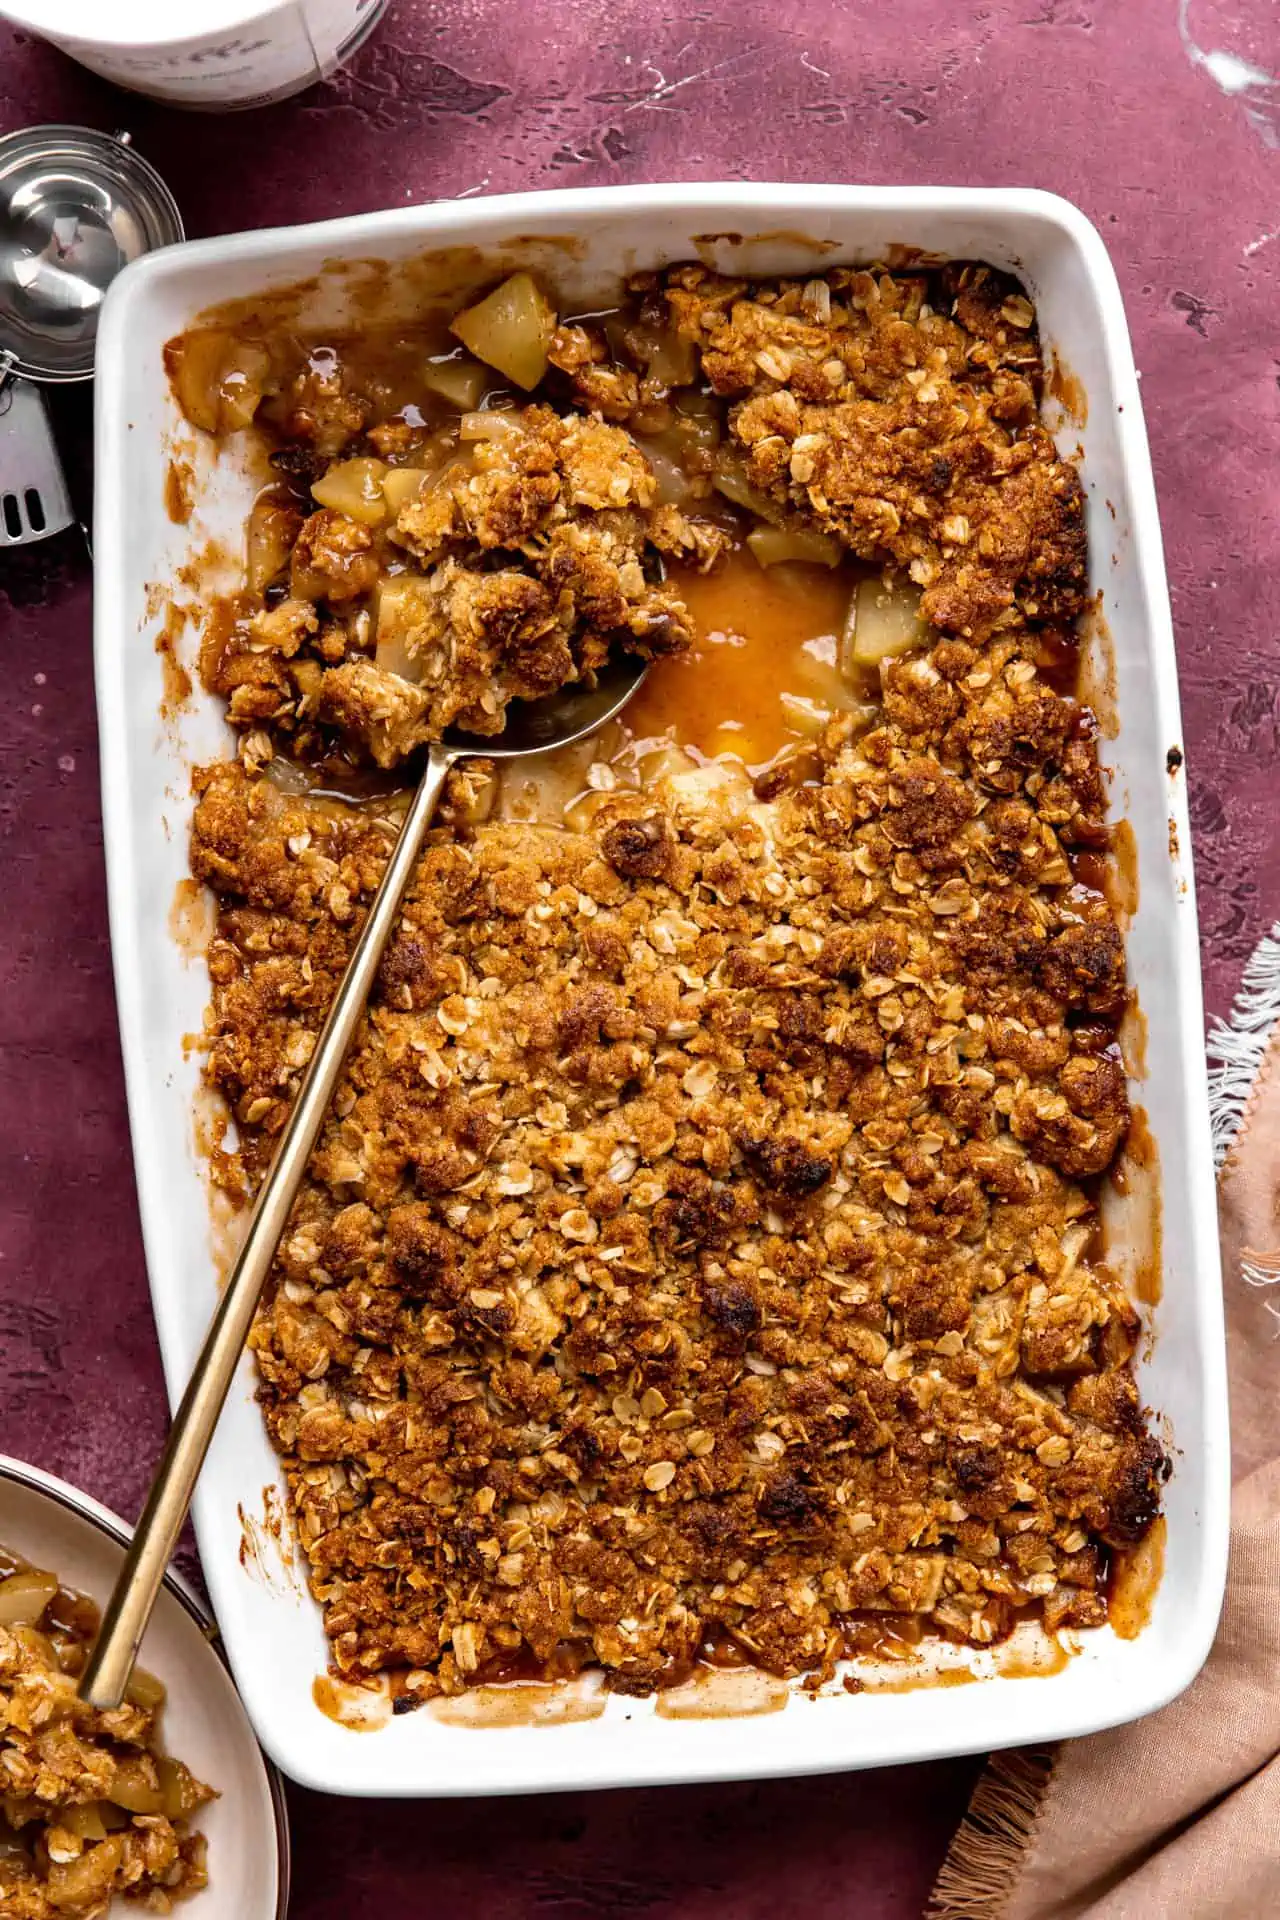 baked apple crisp with brown sugar oat topping in a baking dish.